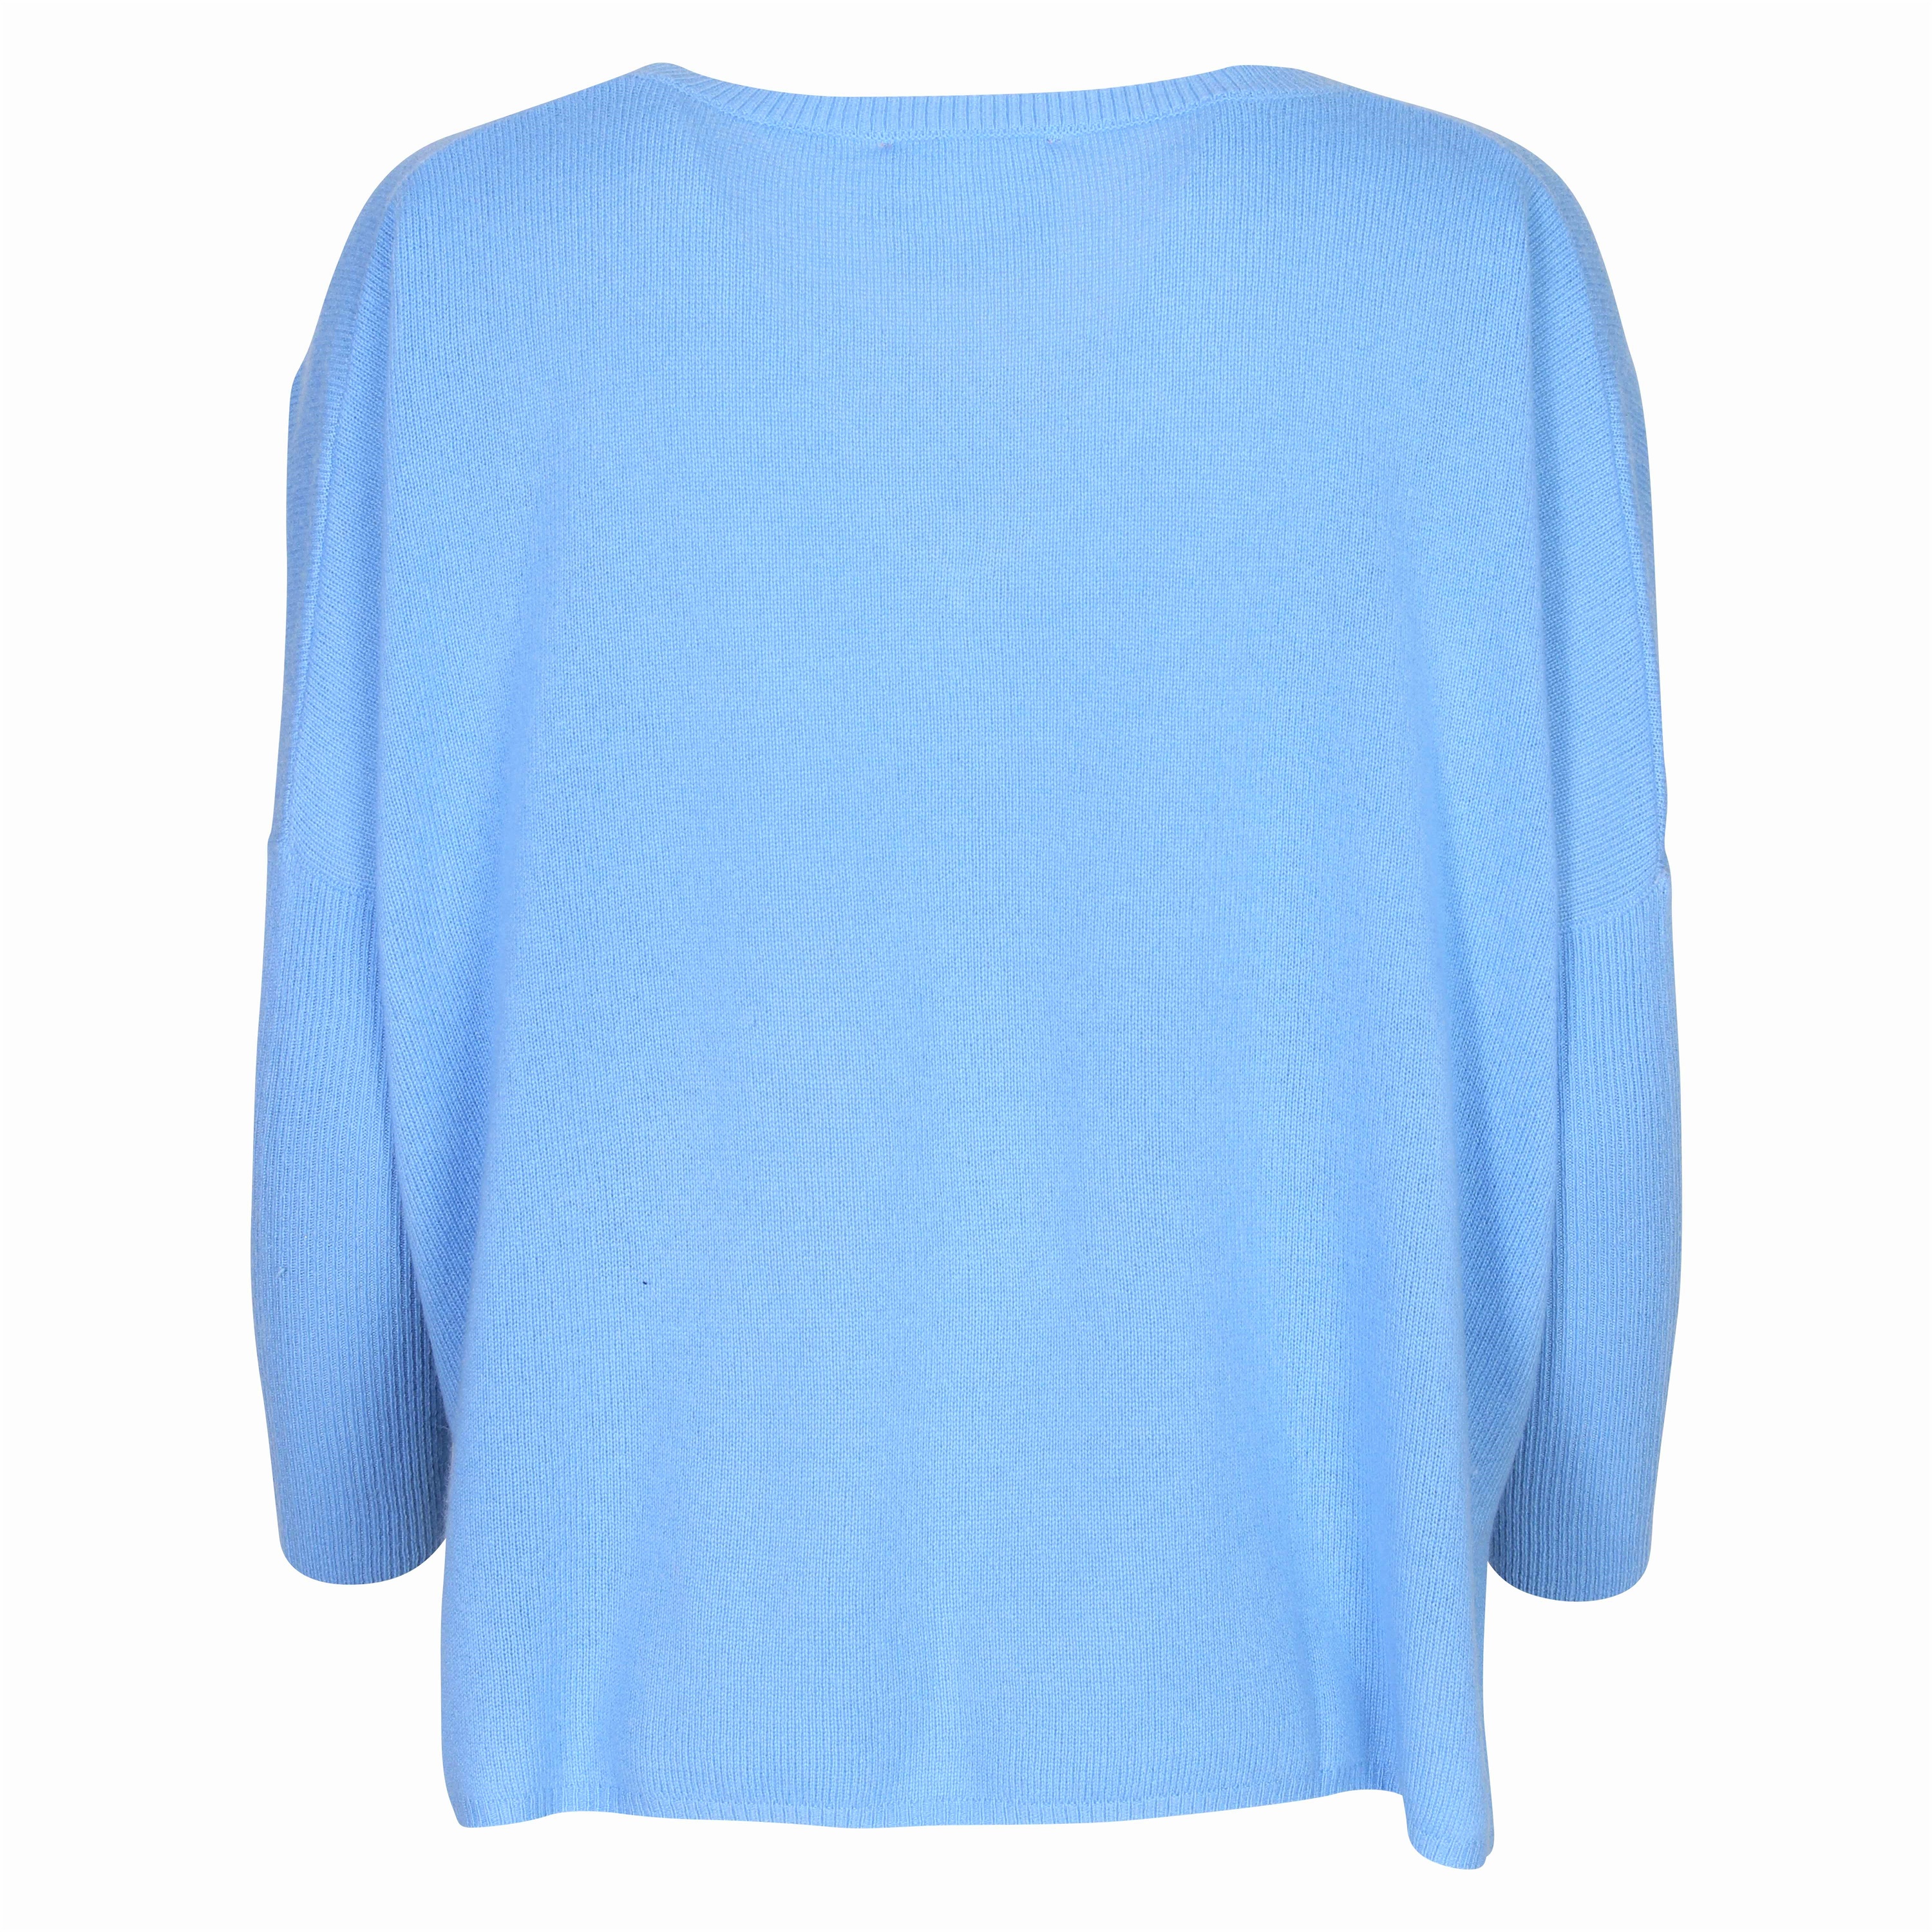 Absolut Cashmere Poncho Sweater in Azur Blue S